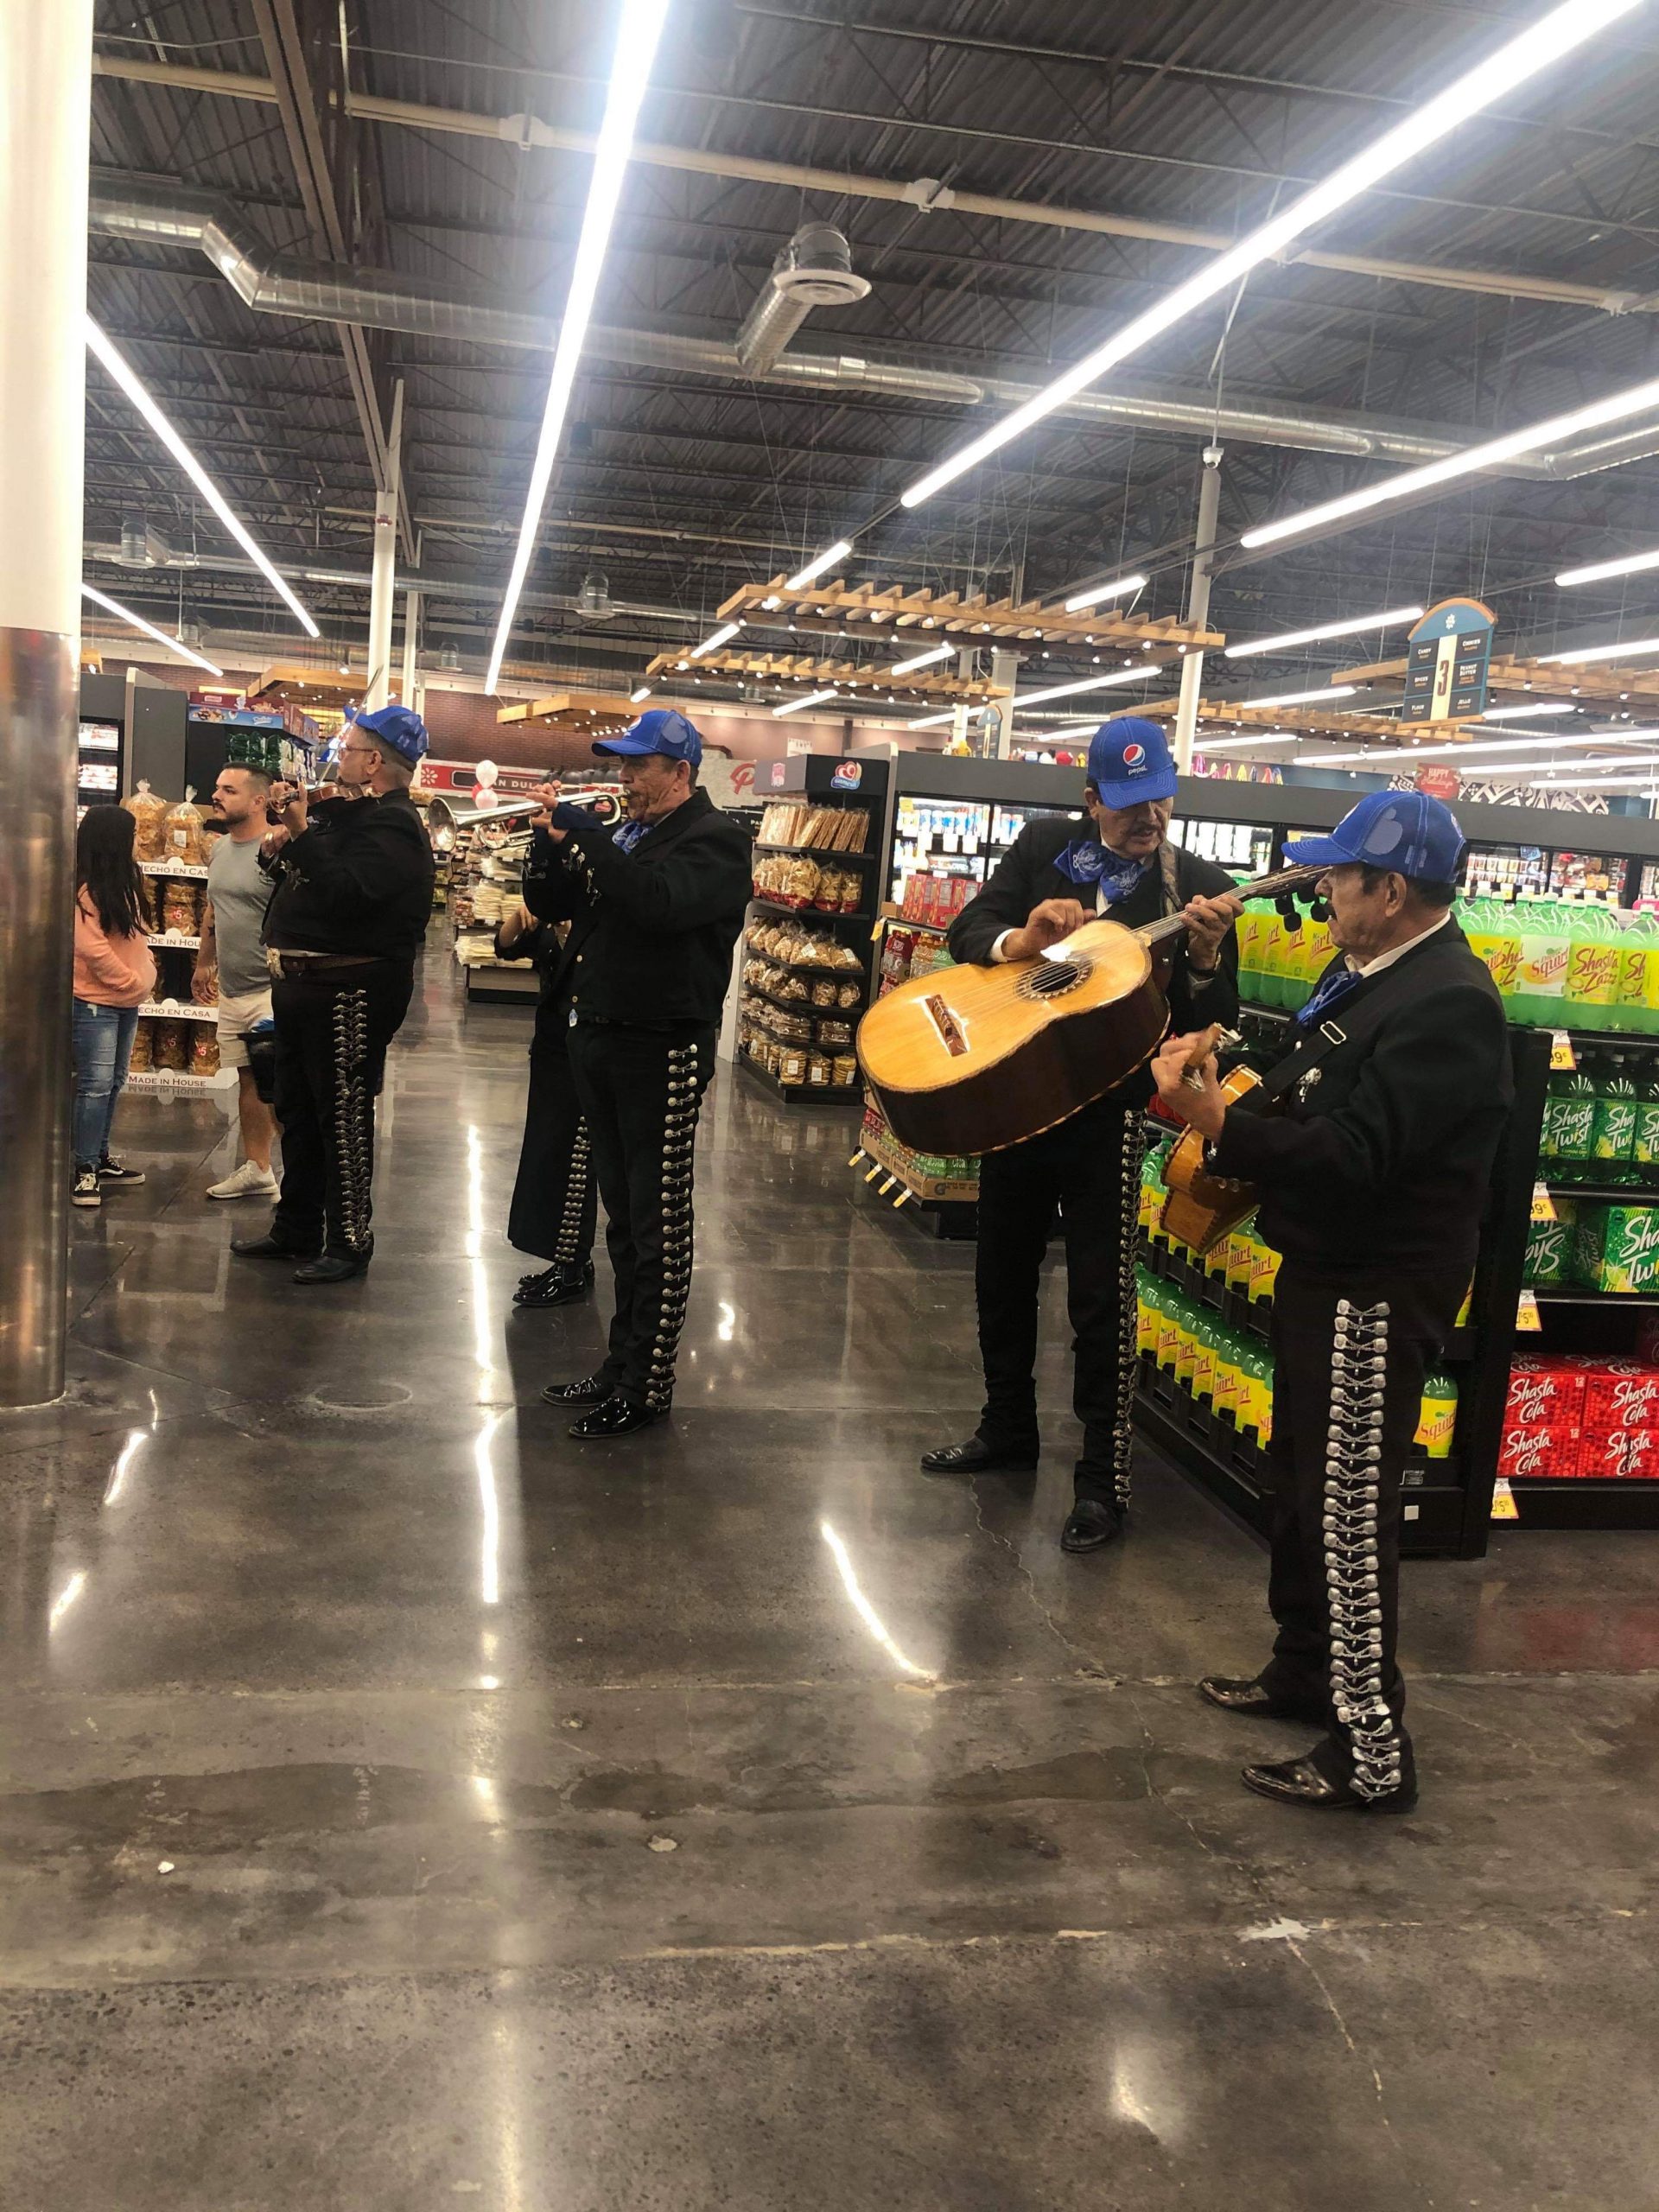 Merry Christmas! Enjoy Exciting Holiday Events with a Mariachi Band in Arizona - Mariachi Alegre ...